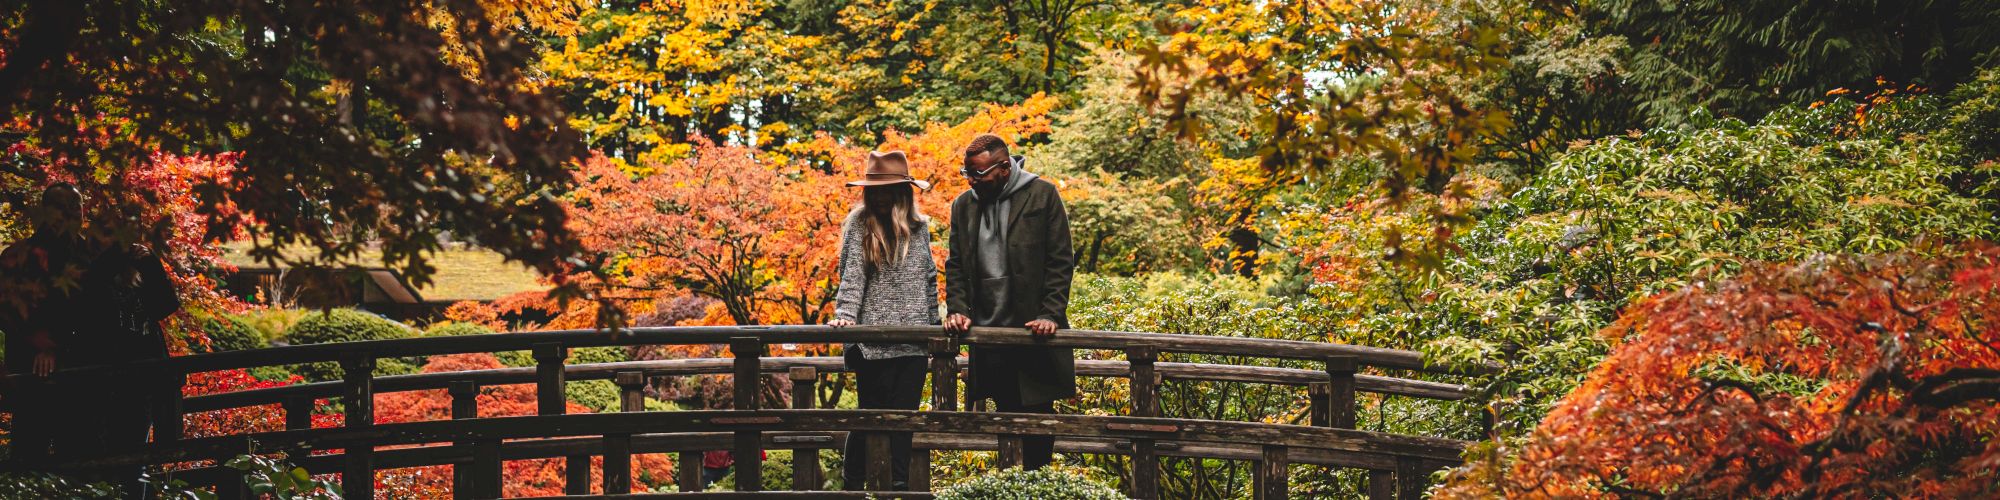 A couple stands on a wooden bridge in a lush, colorful autumn garden with vibrant orange, red, and yellow foliage surrounding them.